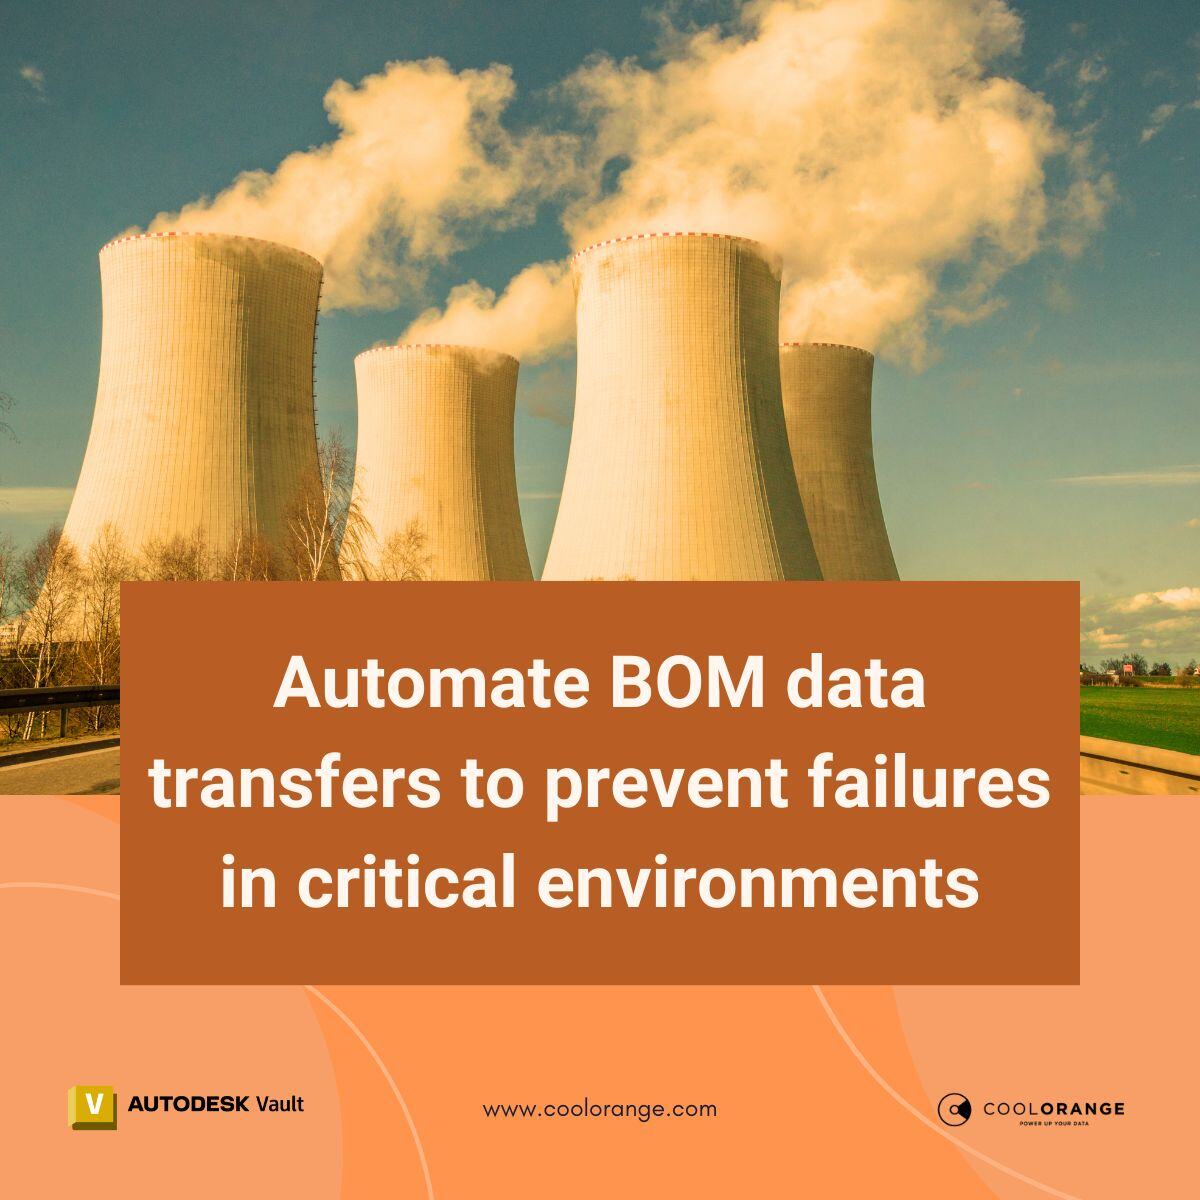 Incorrect BOM Data Transfer Causes Machine Failure in a Hypothetical Nuclear Facility